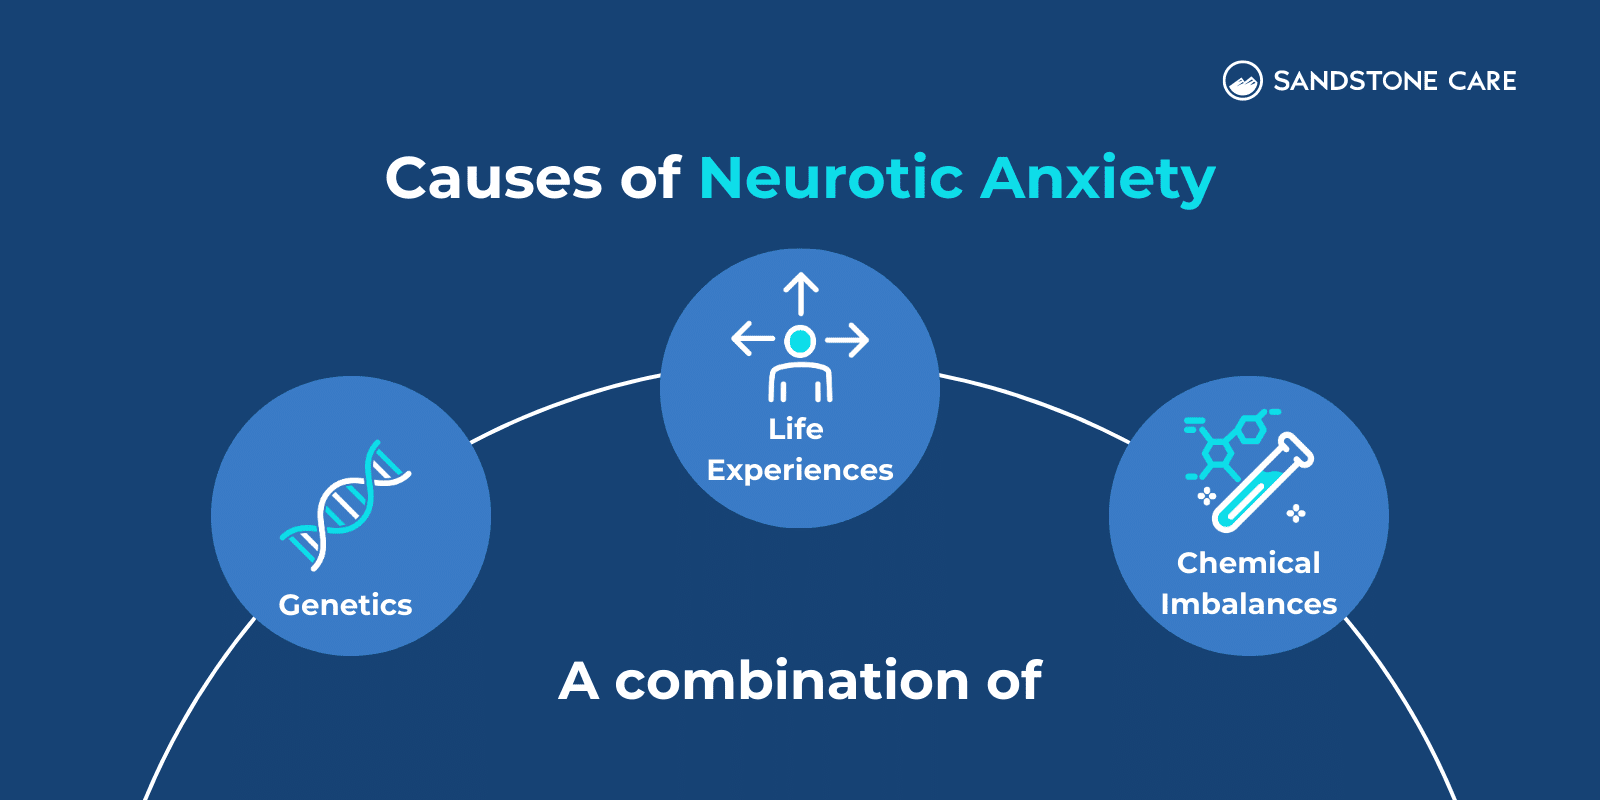 Causes Of Neurotic Anxiety written above a circular diagram showing 3 different causes represented with relevant icons